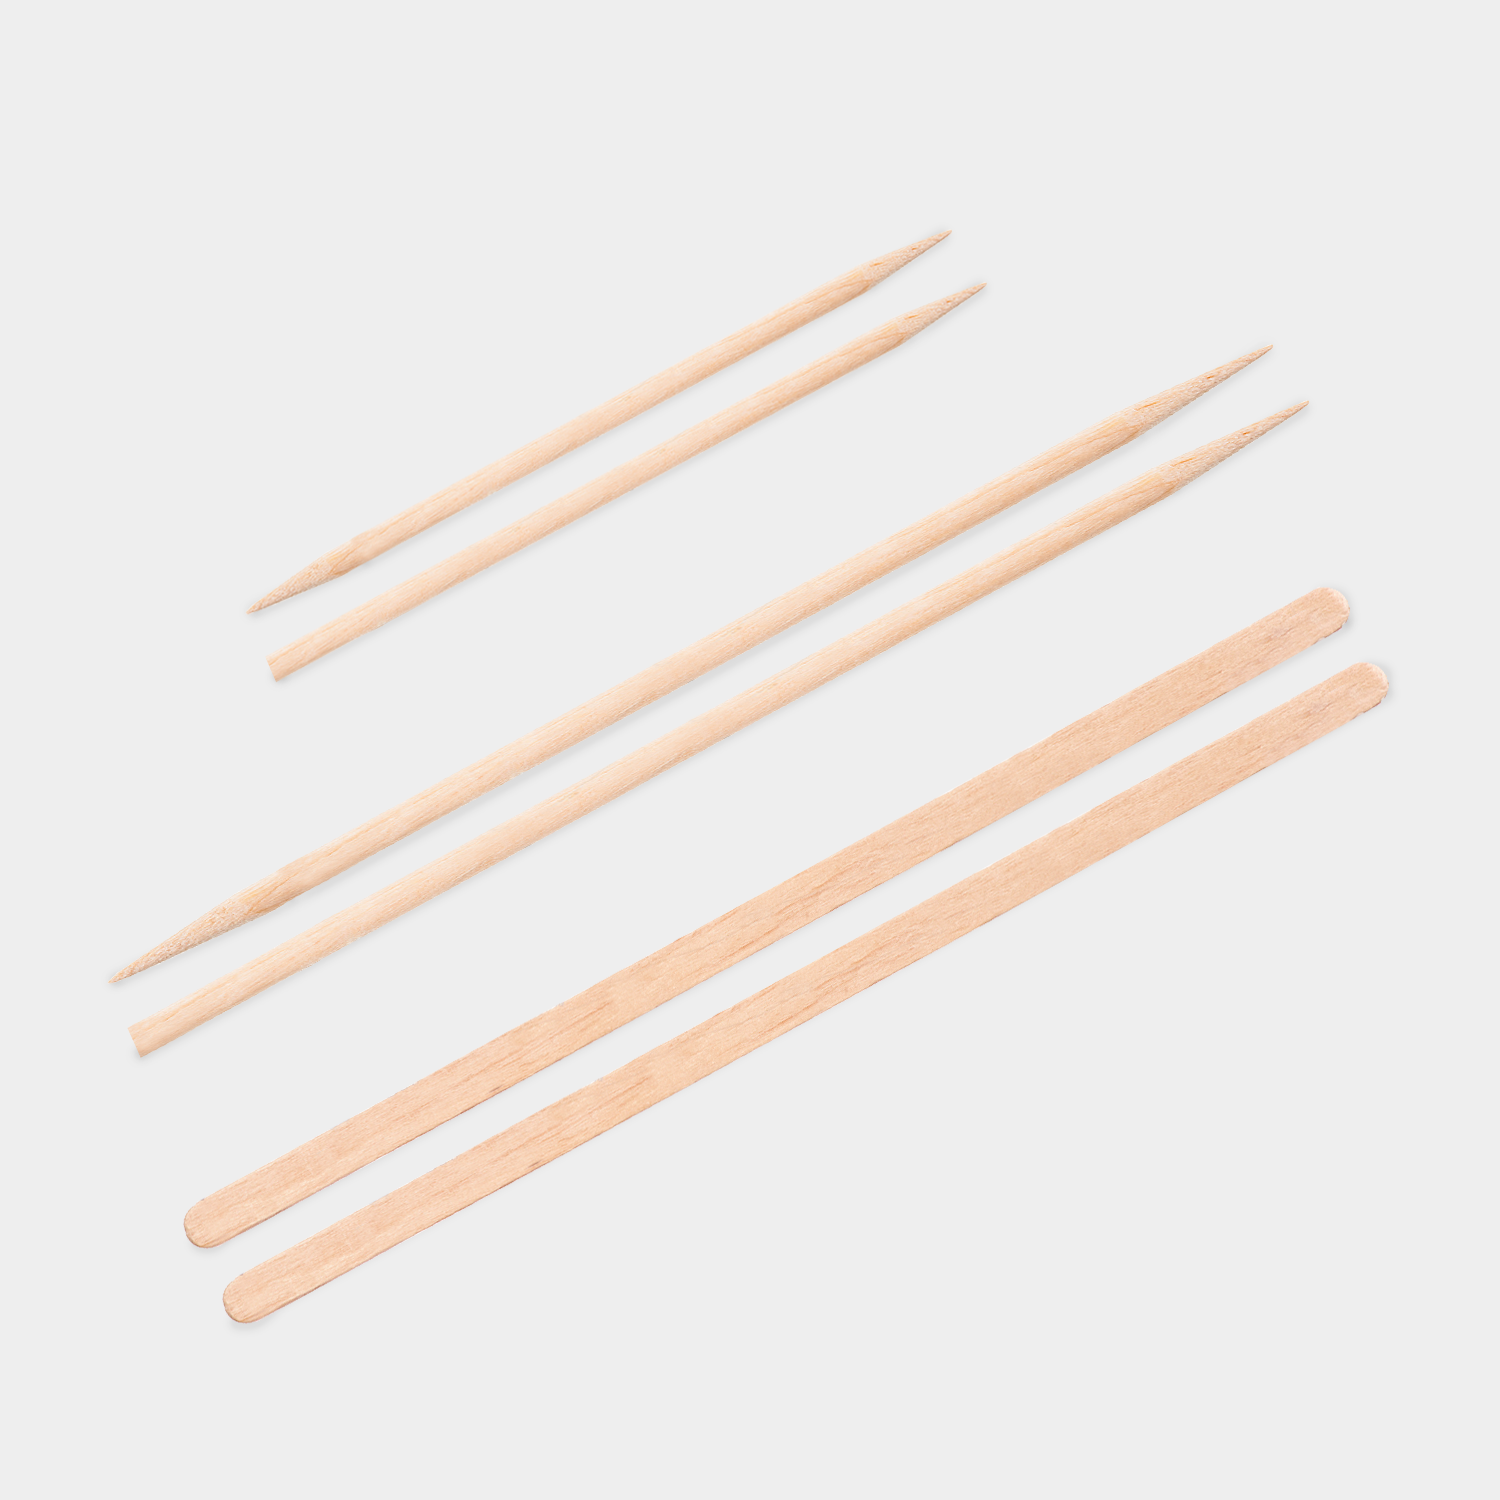 STERILE TOOTHPICKS AND WOODEN APPLICATORS